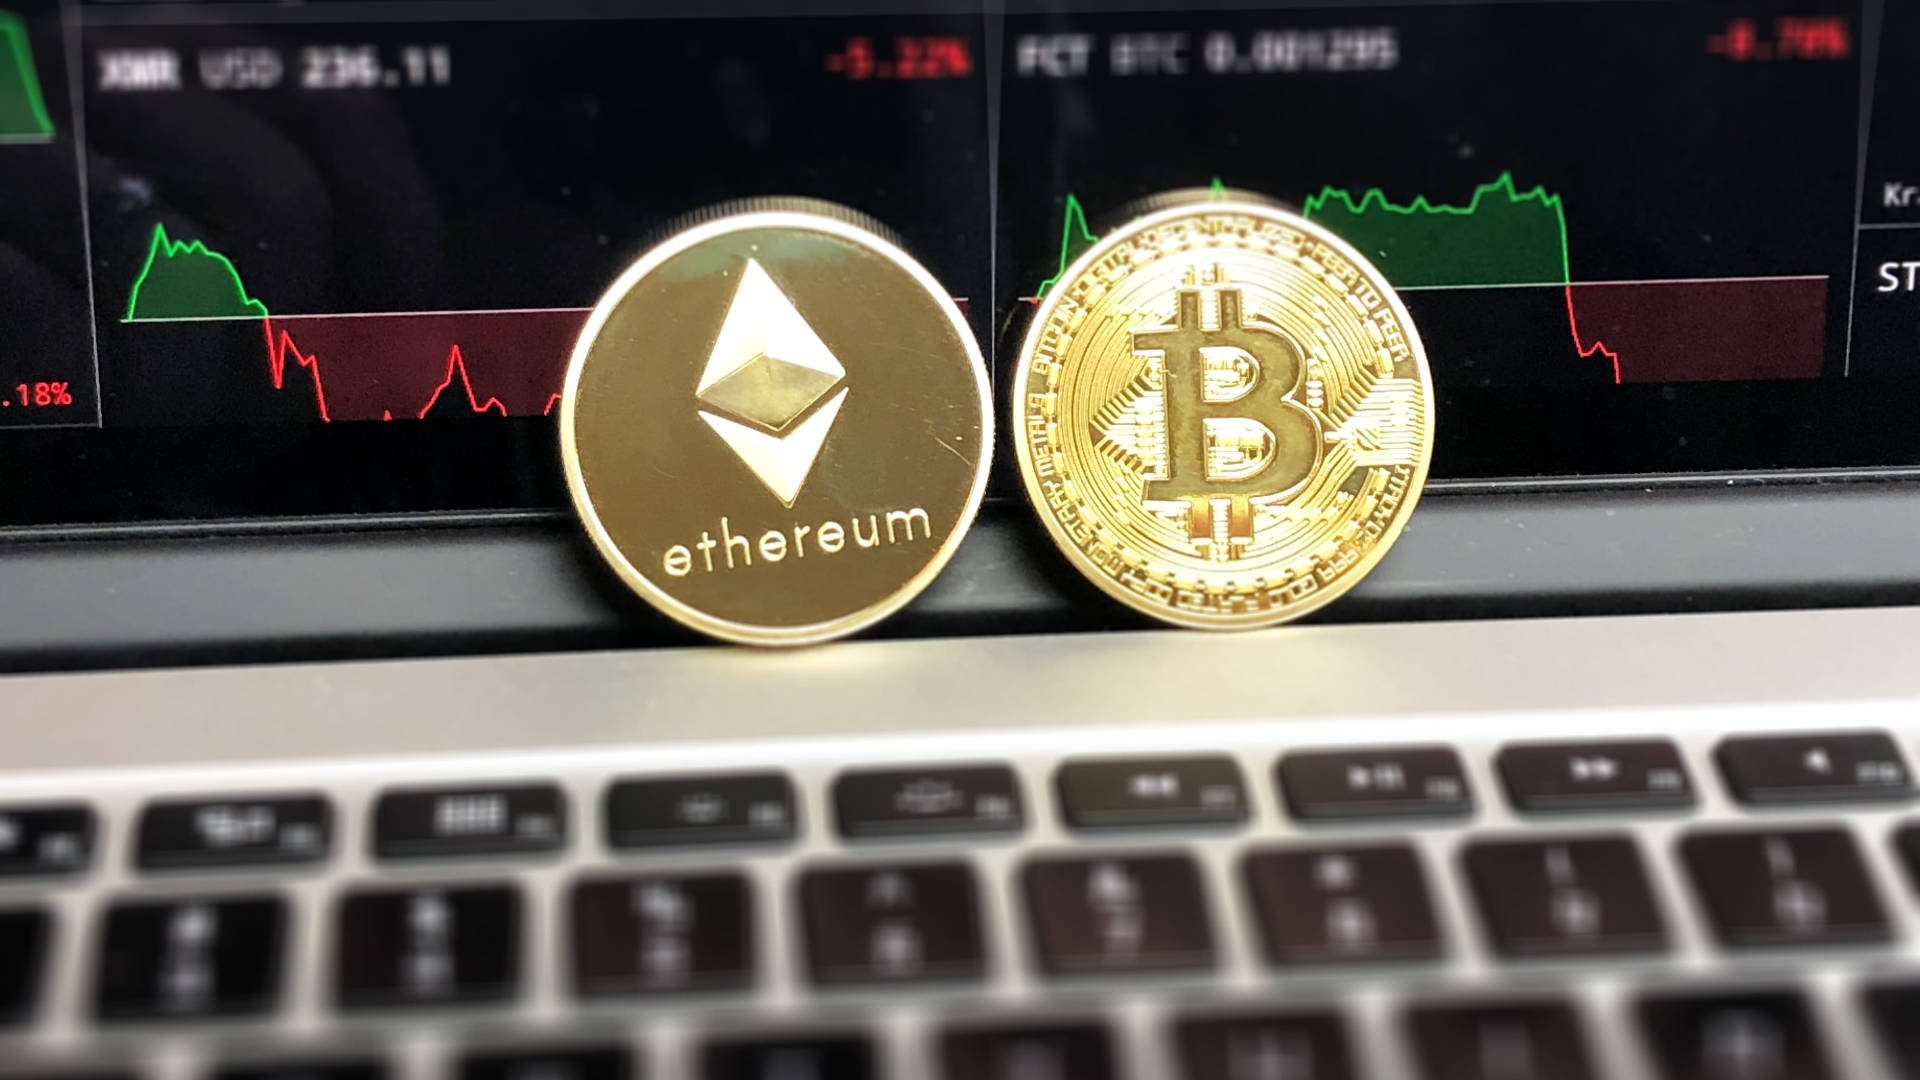 Ethereum And Bitcoin On Laptop